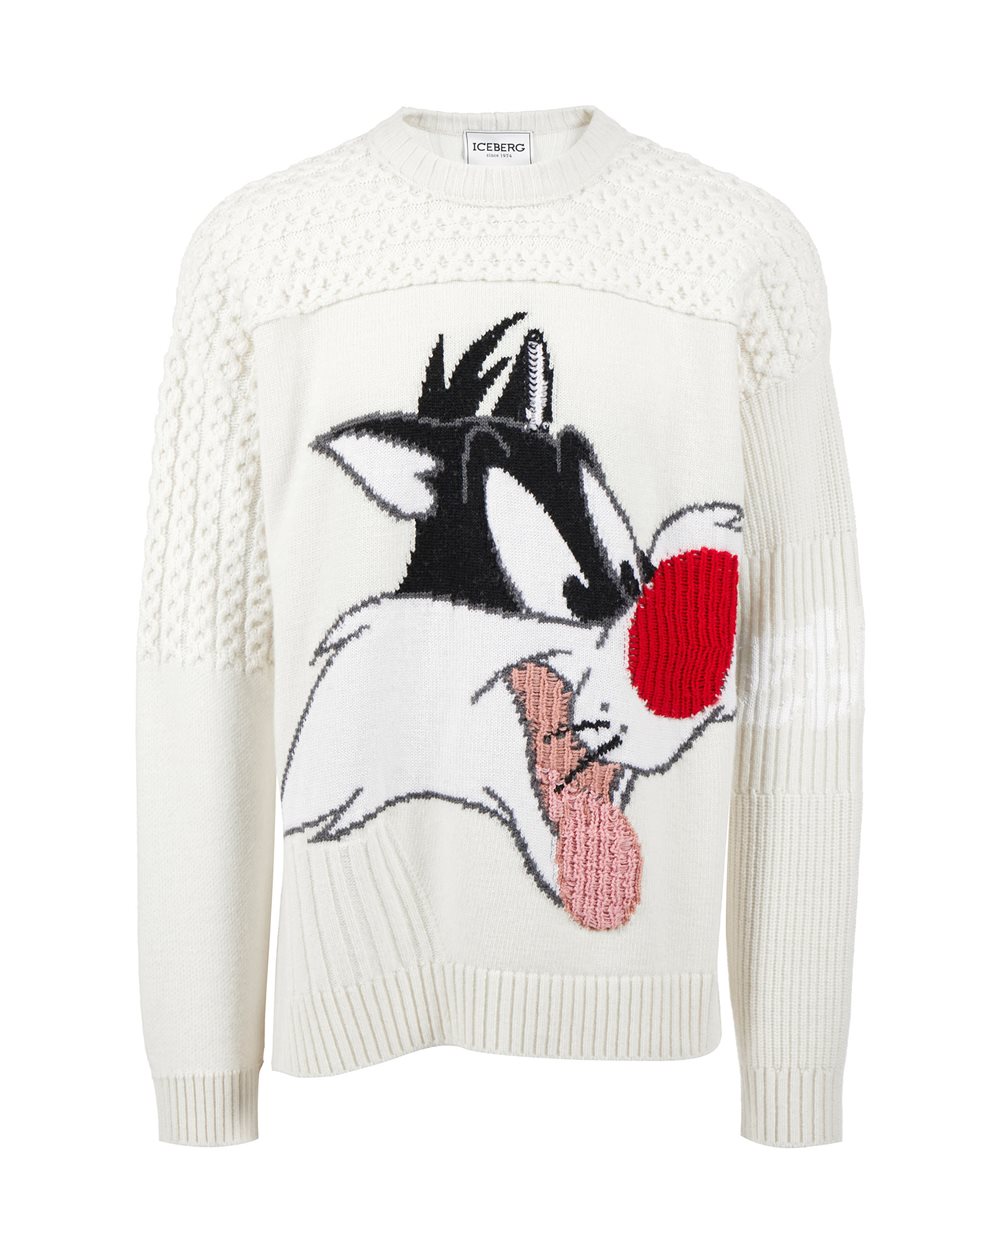 Sweater with logo and cartoon detail - Carosello HP man SHOES | Iceberg - Official Website